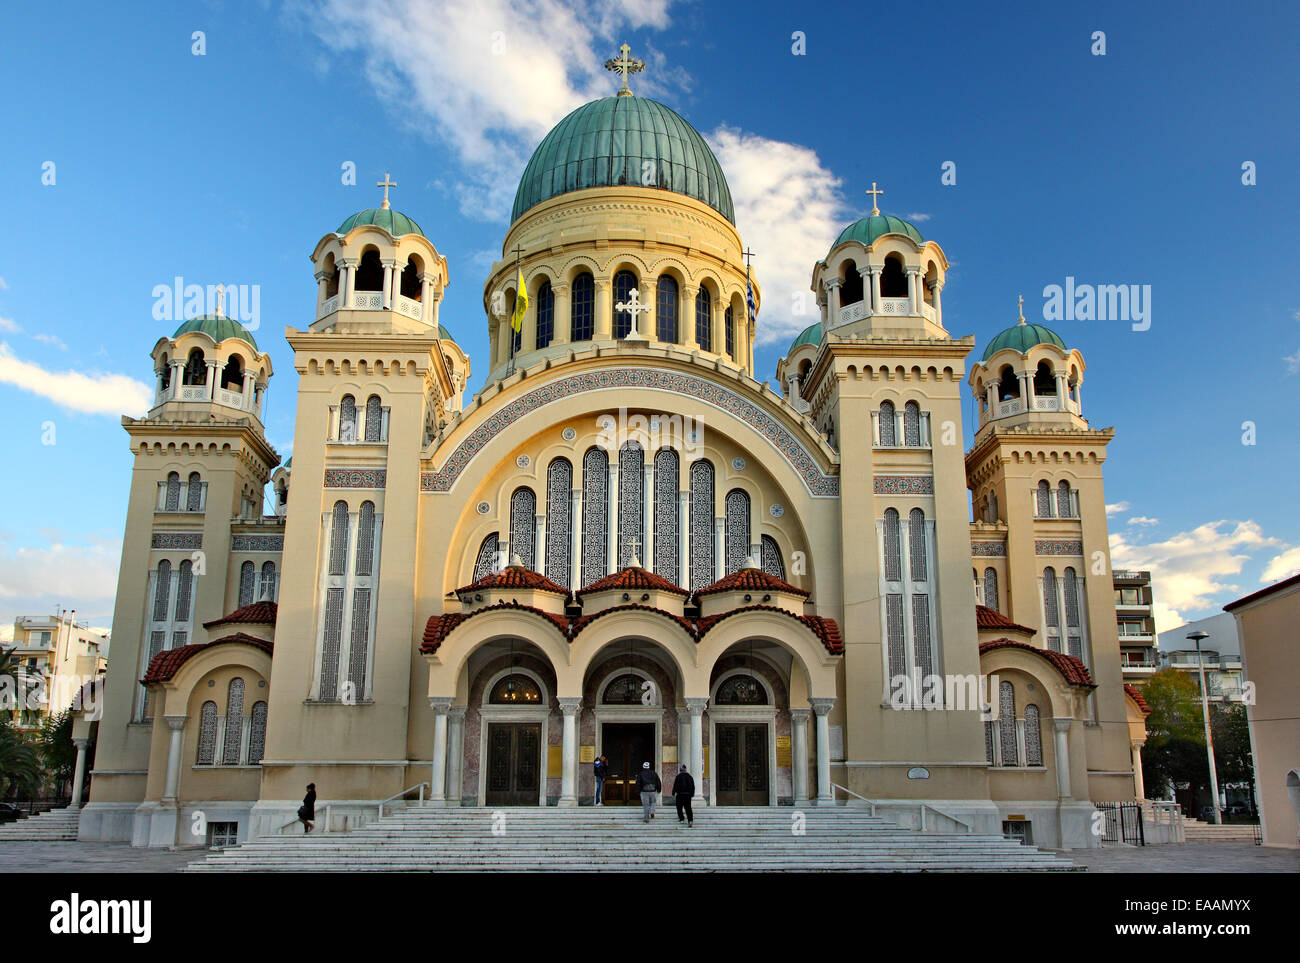 The Cathedral of Agios Andreas ('Saint Andrew'), patron saint of Patras city, Achaia, Peloponnese, Greece. Stock Photo